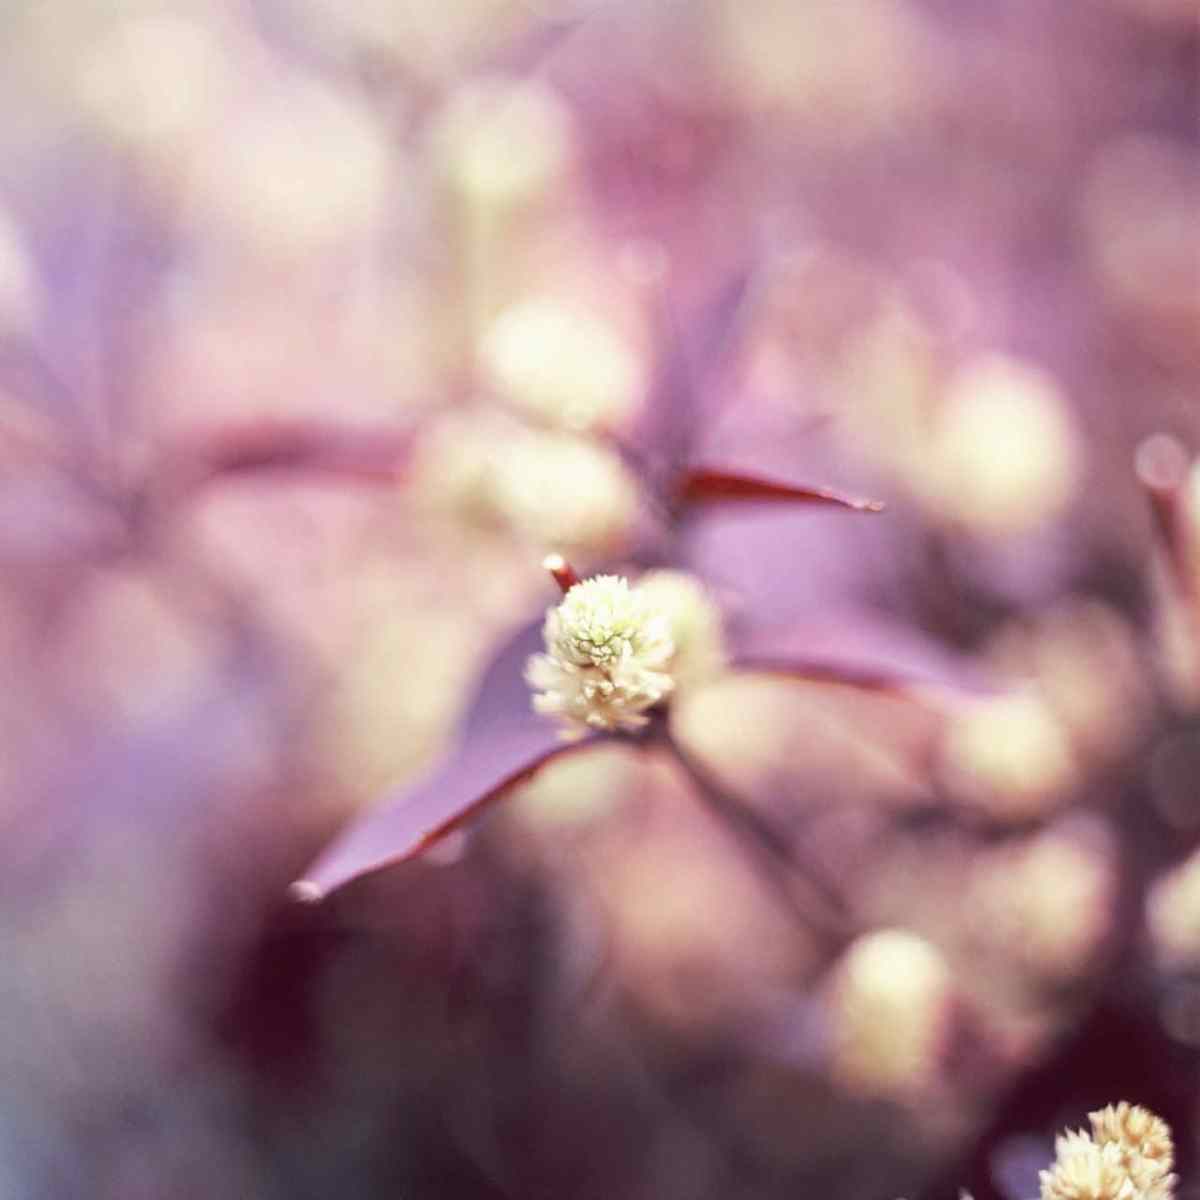 Spring buds #02 - Shot on Fuji Provia 400X (RXP) at EI 800. Color reversal (slide) film in 120 format shot as 6x6. Hasselblad 32E. 1-stop push.